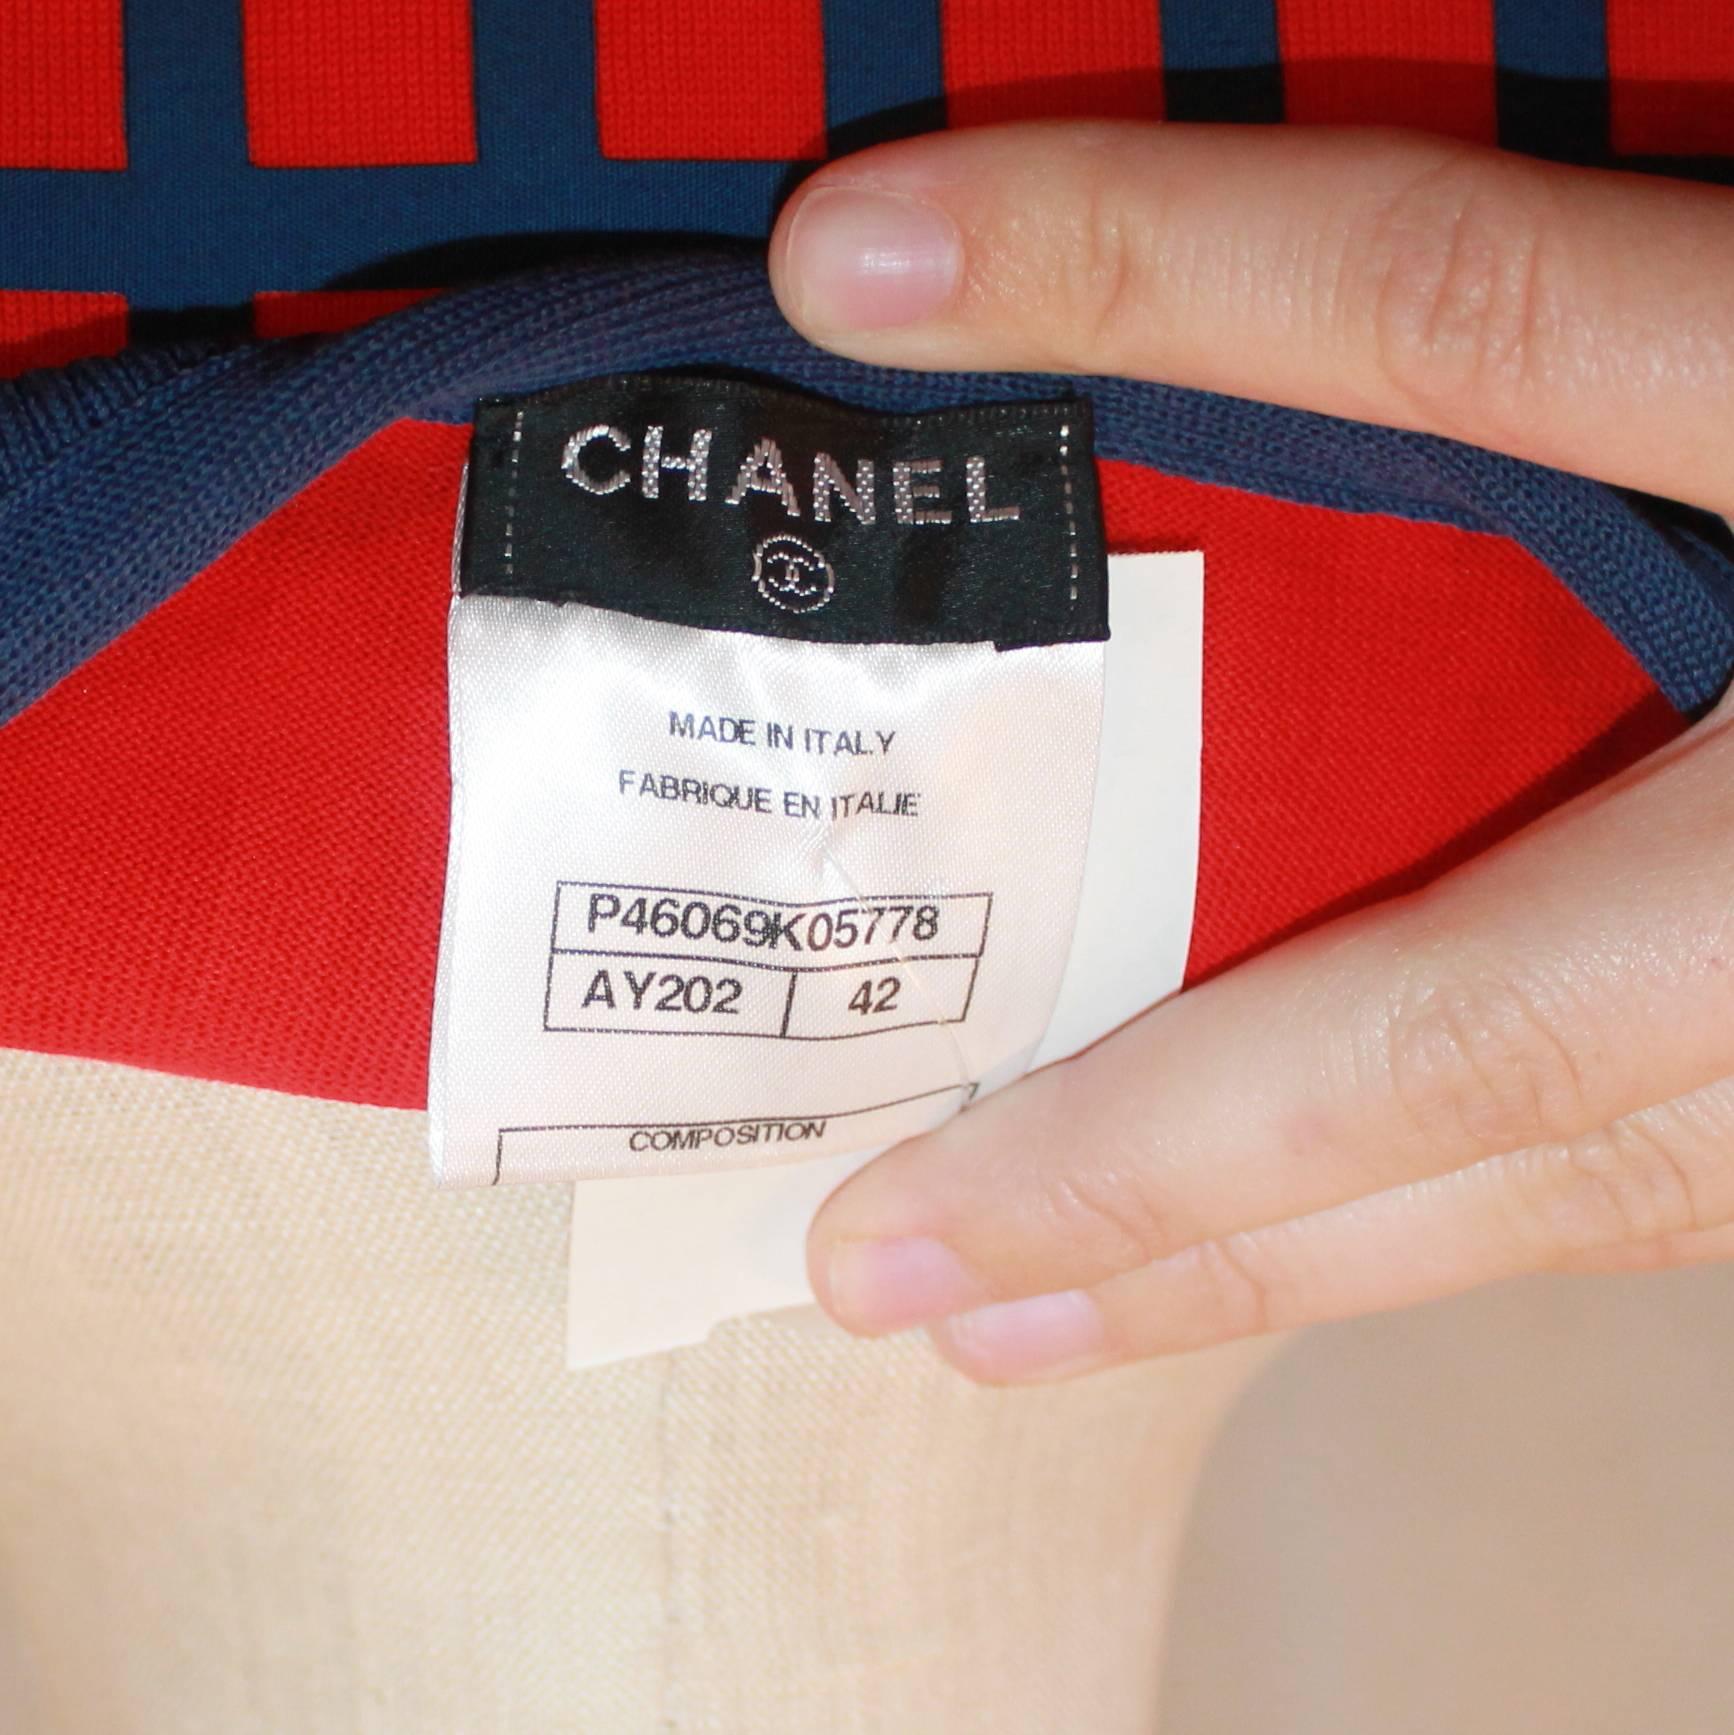 Chanel Red and Blue Windowpane Print Jacket w/ Pearl Buttons - 42 1